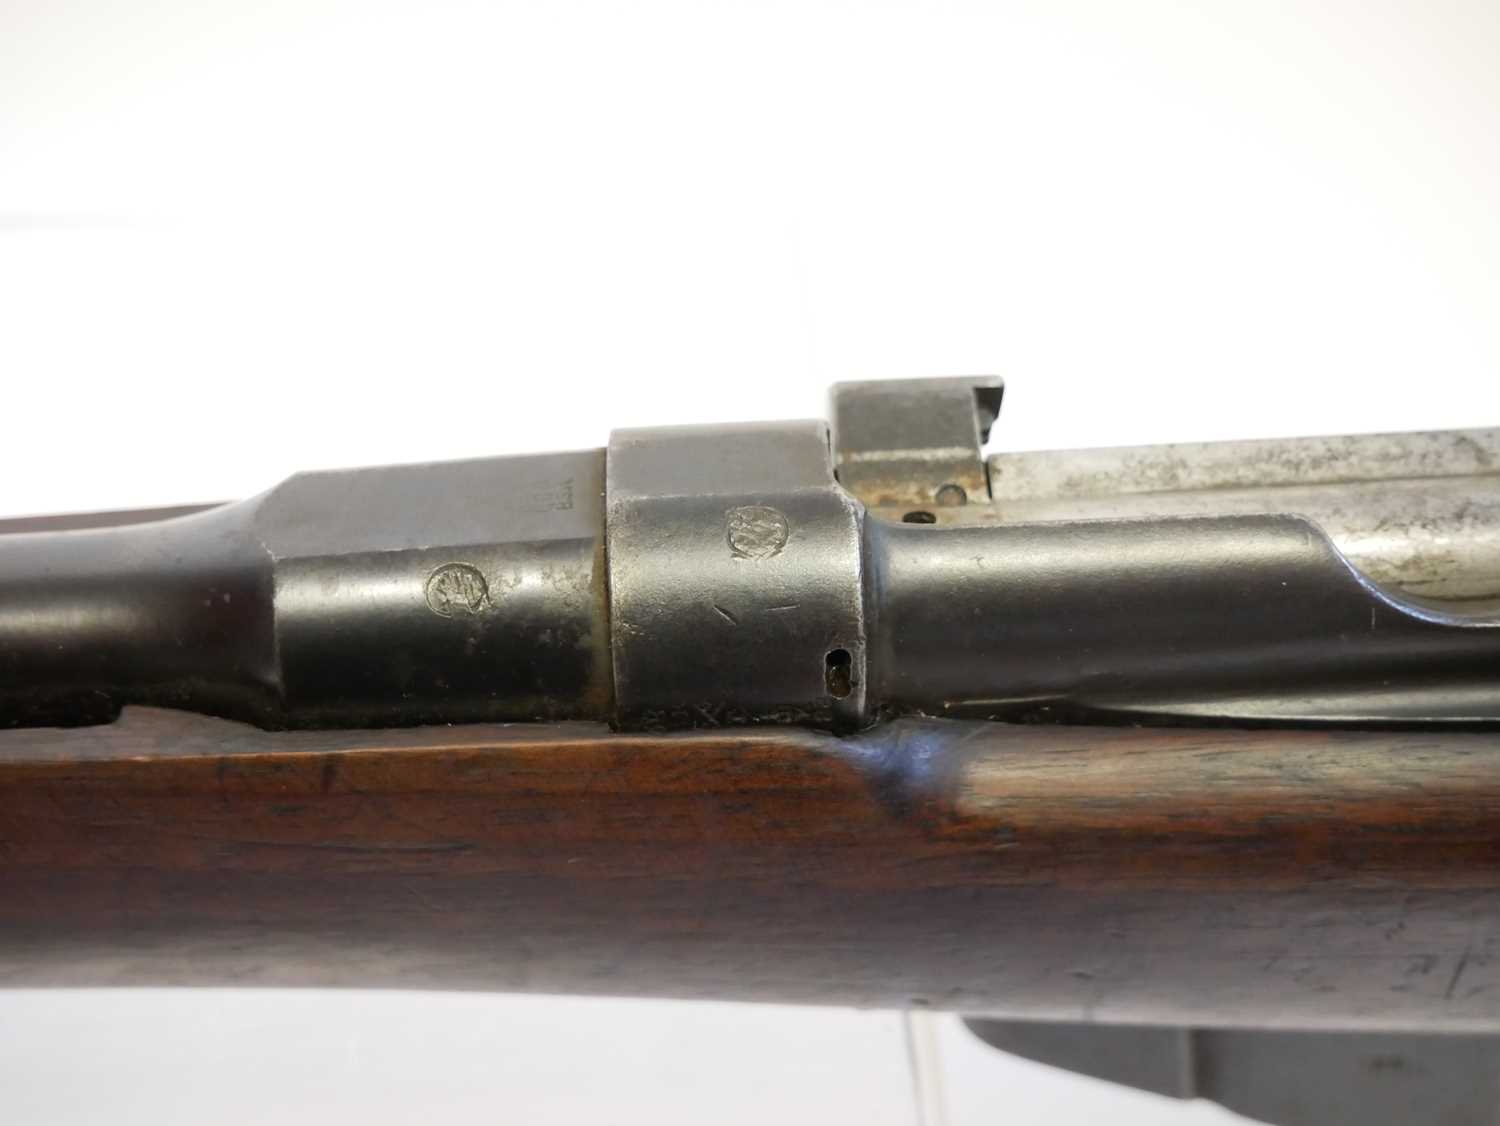 London Small Arms Lee Enfield .22 bolt action rifle, serial number 21324, 25inch barrel fitted - Image 12 of 14